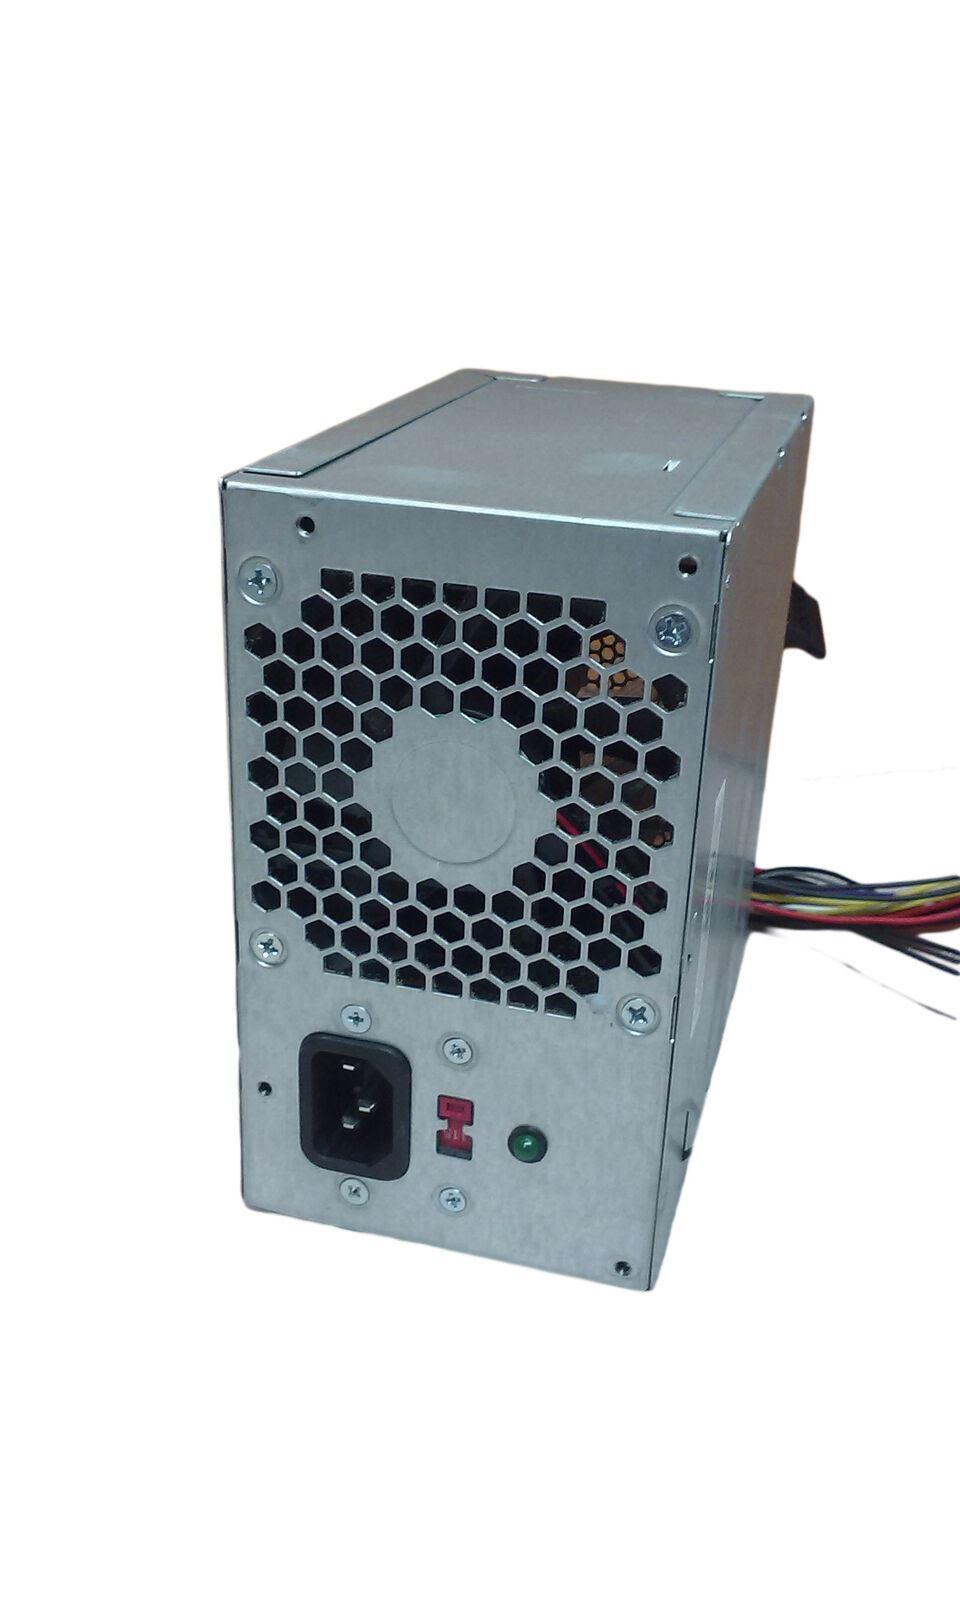 715185 001 D11 300N1A PS 5301 02 667893 002 DPS 300AB 73 667893 001 power supply gamay 300w regular atx